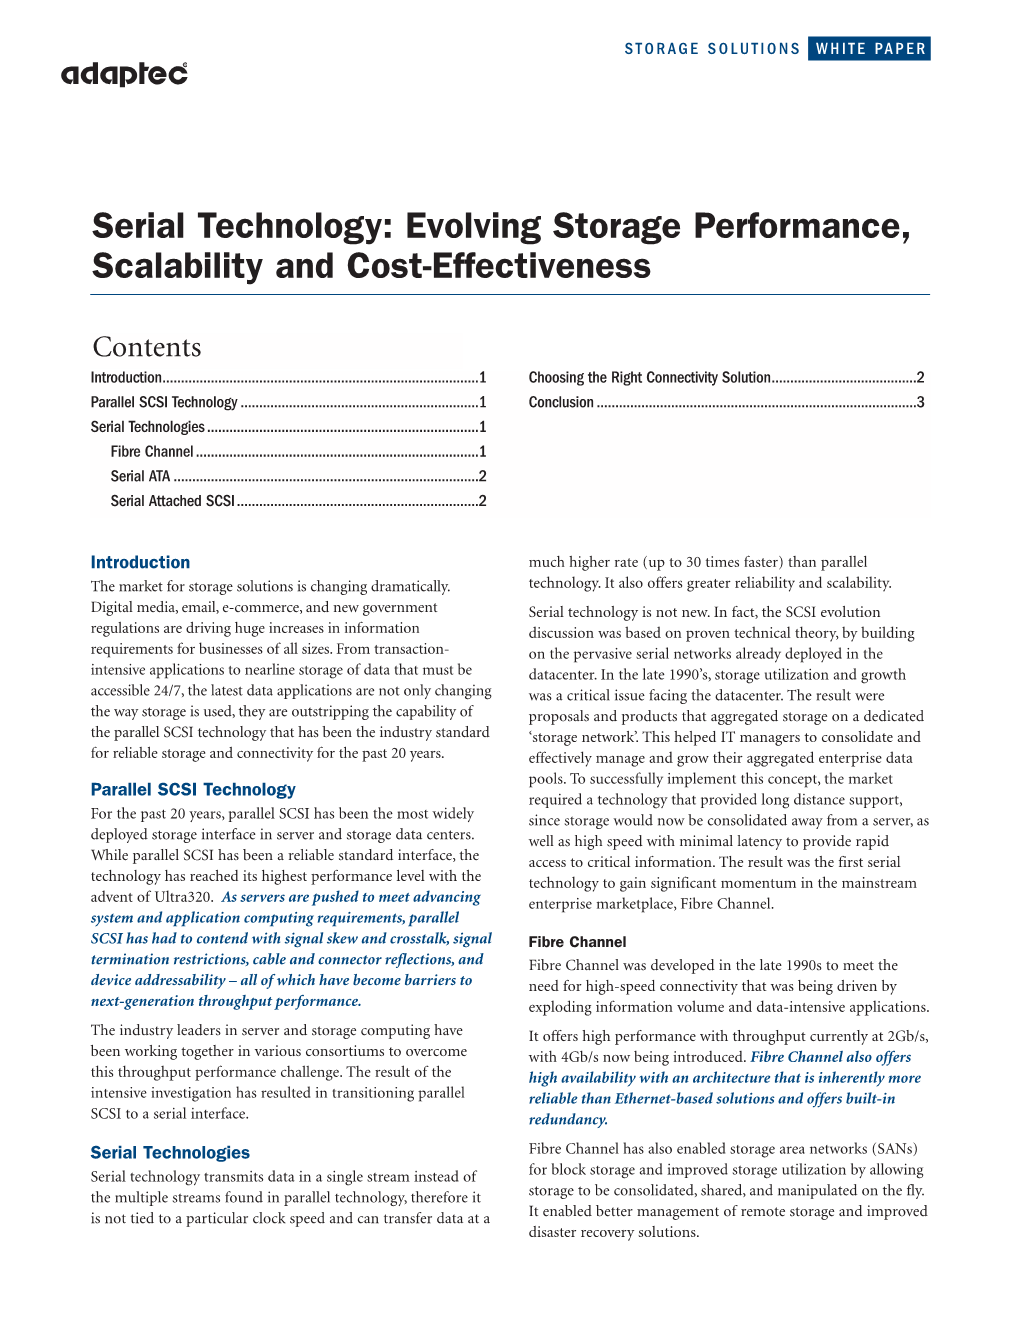 Serial Technology: Evolving Storage Performance, Scalability and Cost-Effectiveness